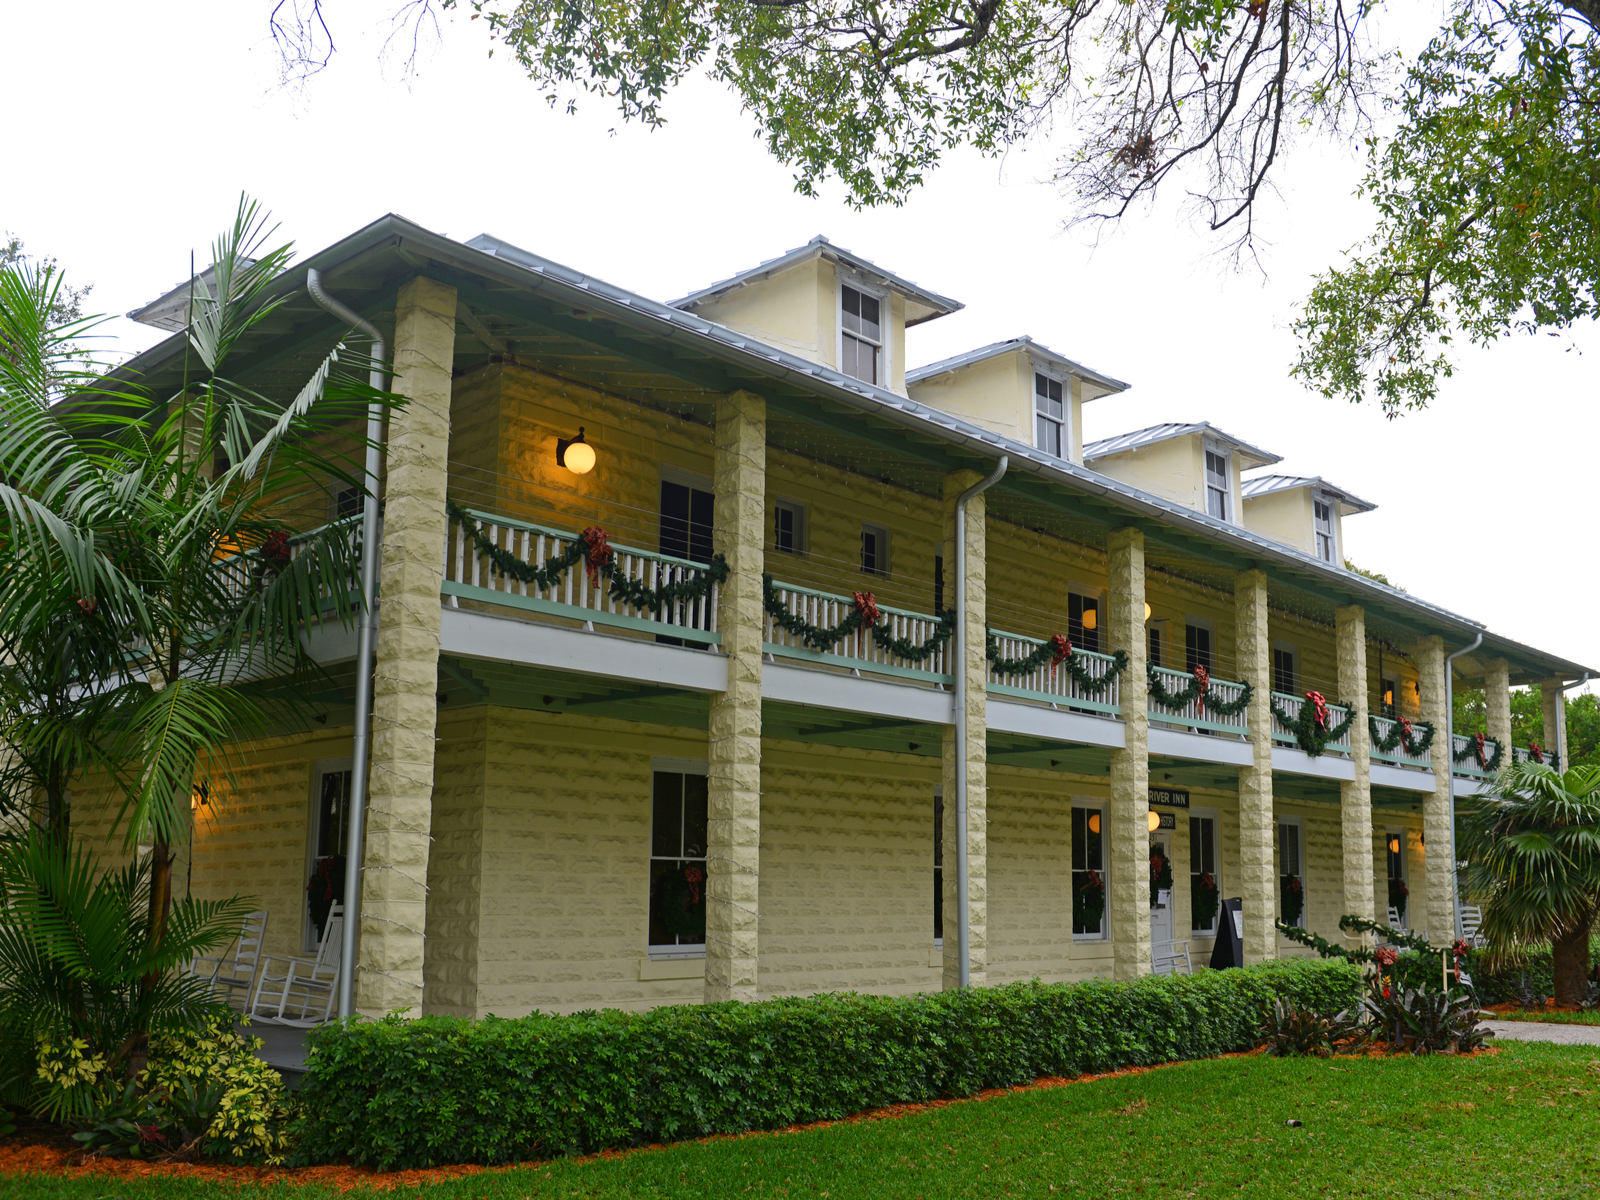 One of the oldest hotels built in 1905, New River Inn, well-preserved as part of Fort Lauderdale Historical Society & Museum, one of the best things to do in Fort Lauderdale 